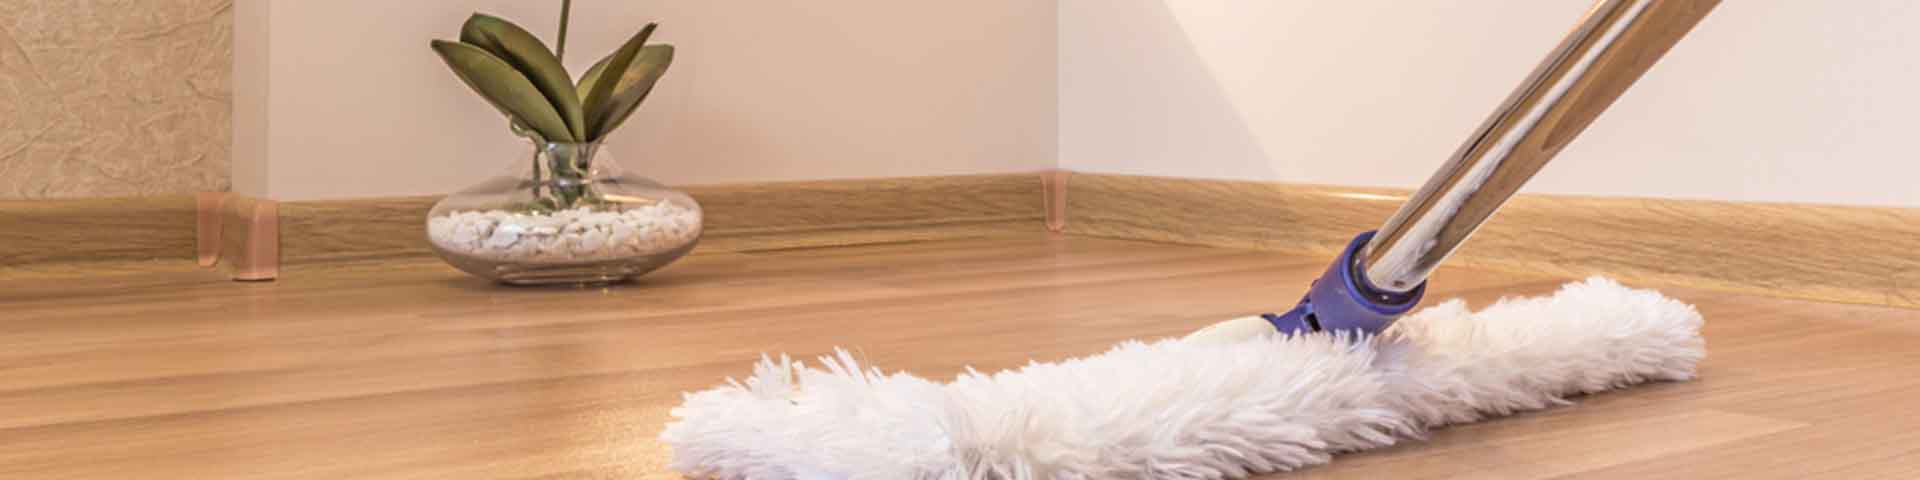 how to clean hardwood floors bothell, renton, mercer island, issaquah, green lake, queen anne